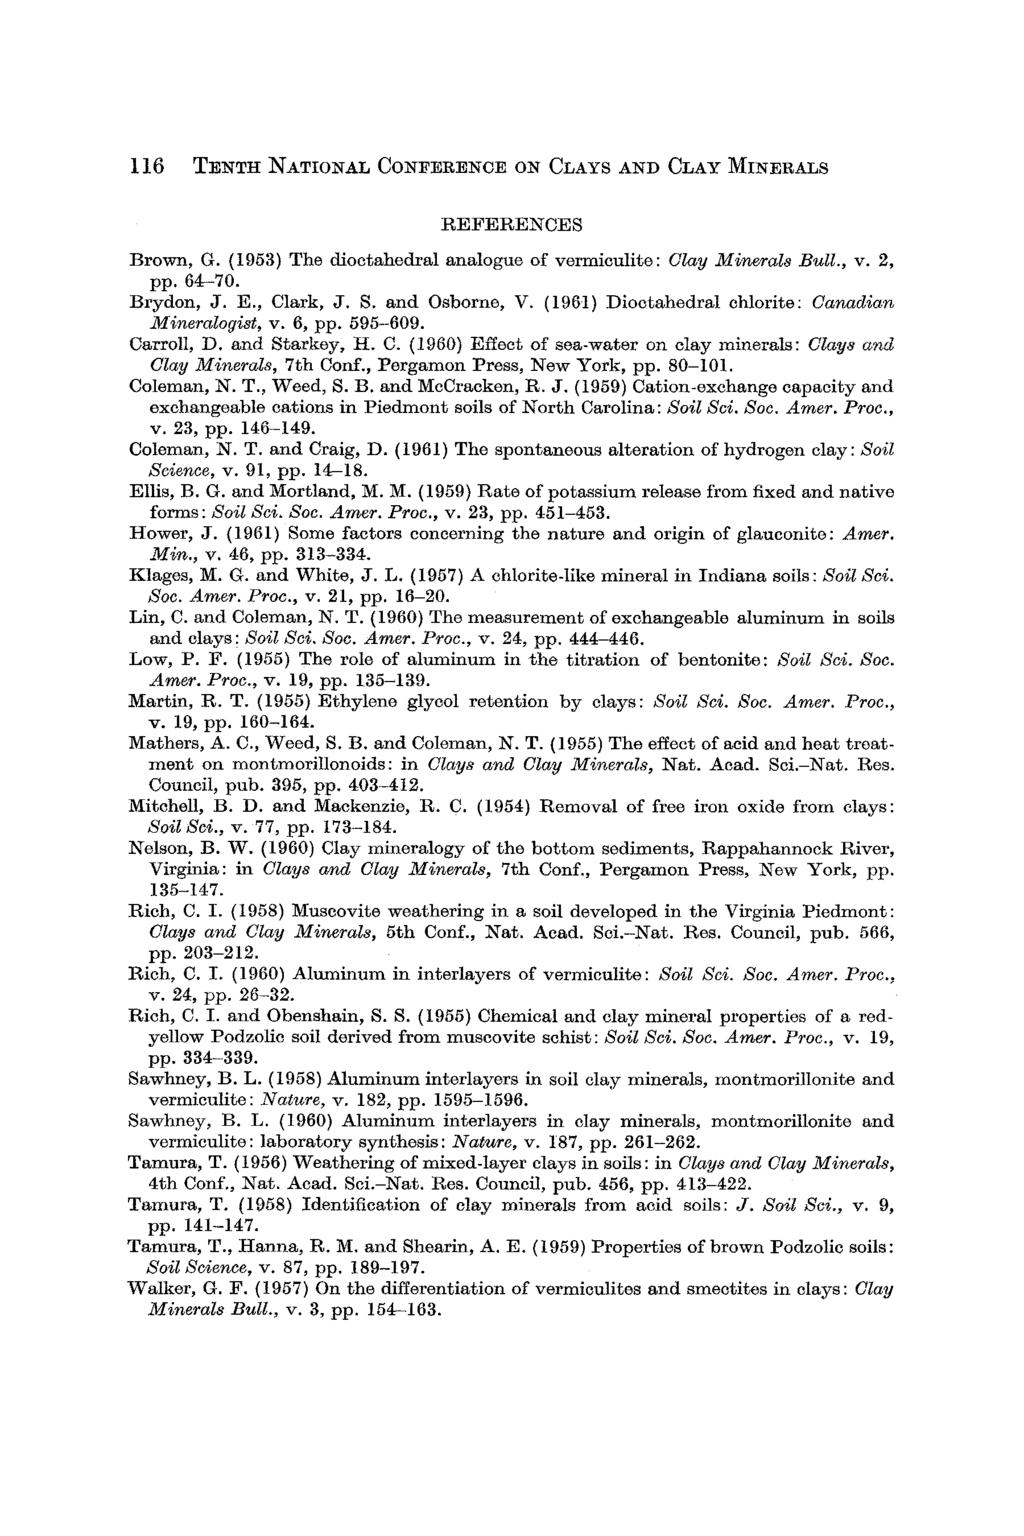 116 TENTH NATIONAL CONFERENCE ON CLAYS AND CLAY MINERALS REFERENCES Brown, G. (1953) The dioctahedral analogue of vermiculite: Clay 2/1i~rals Bull., v. 2, pp. 64-70. Brydon, J. E., Clark, J. S.